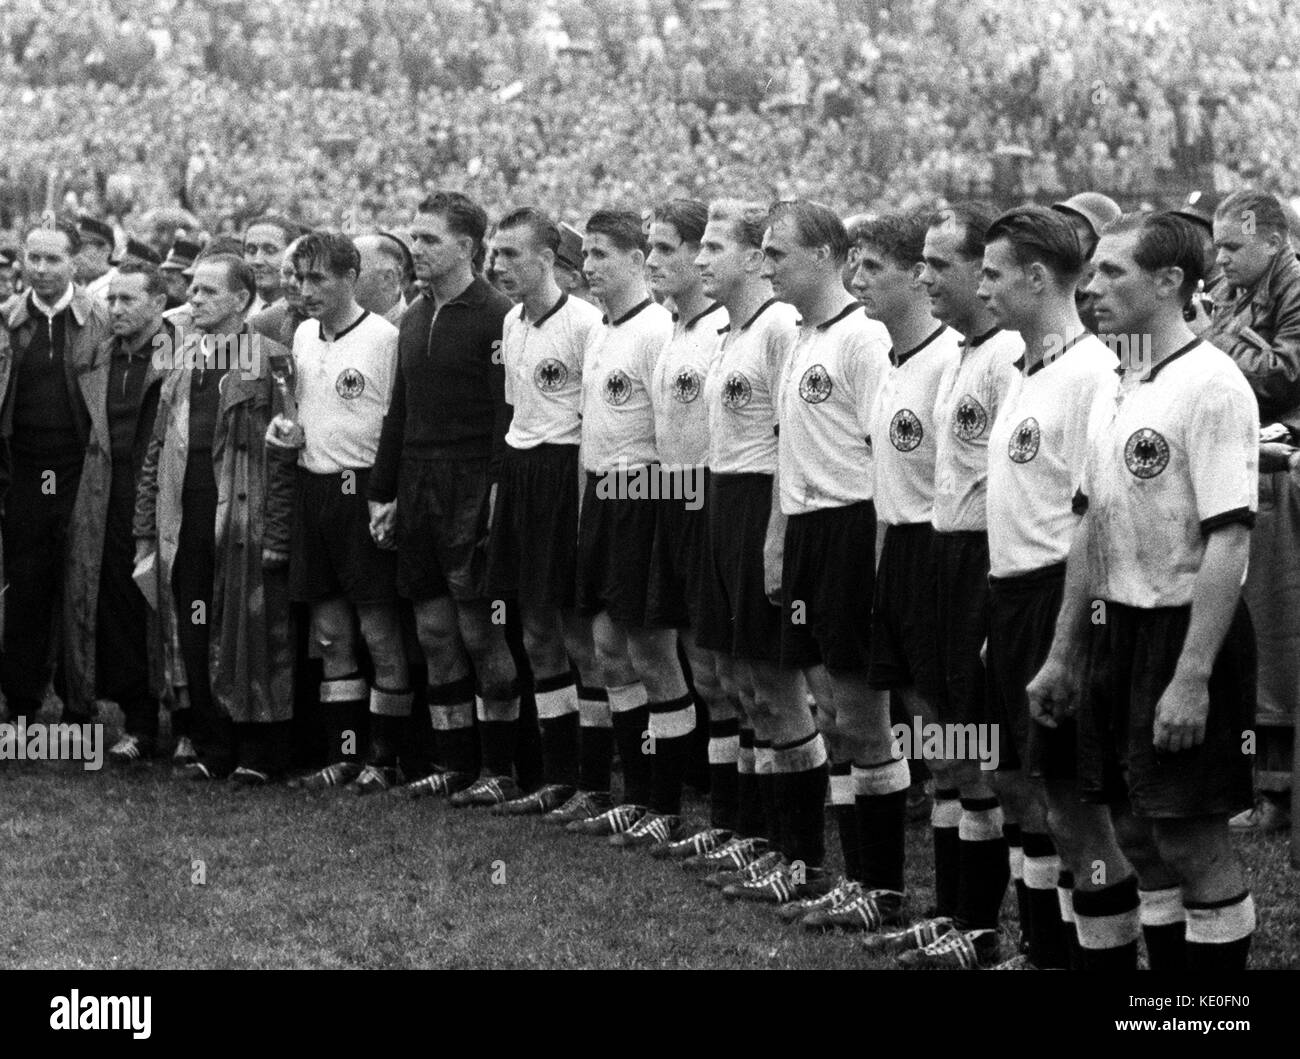 ARCHIVE - The German national team stands before 53000 spectators after their 3-2 victory against Hungary at the World Cup at the Wankdorf Stadium in Bern, Switzerland, 4 July 1954. From Left to Right: head coach Sepp Herberger, captain Fritz Walter with the Jules-Rimet-Cup, goalkeeper Toni Turek, Horst Eckel, Helmut Rahn, Ottmar Walter, Werner Liebrich, Jupp Posipal, Hans Schäfer, Werner Kohlmeyer, Karl Mai and Max Morlock. To the left of Herberger stand Adolf Dassler (L) and masseur Erich Deuser (2-L). Hans Schaefer will turn 90 years old on the 19th of October 2017. Photo: Richard Koll/dpa Stock Photo